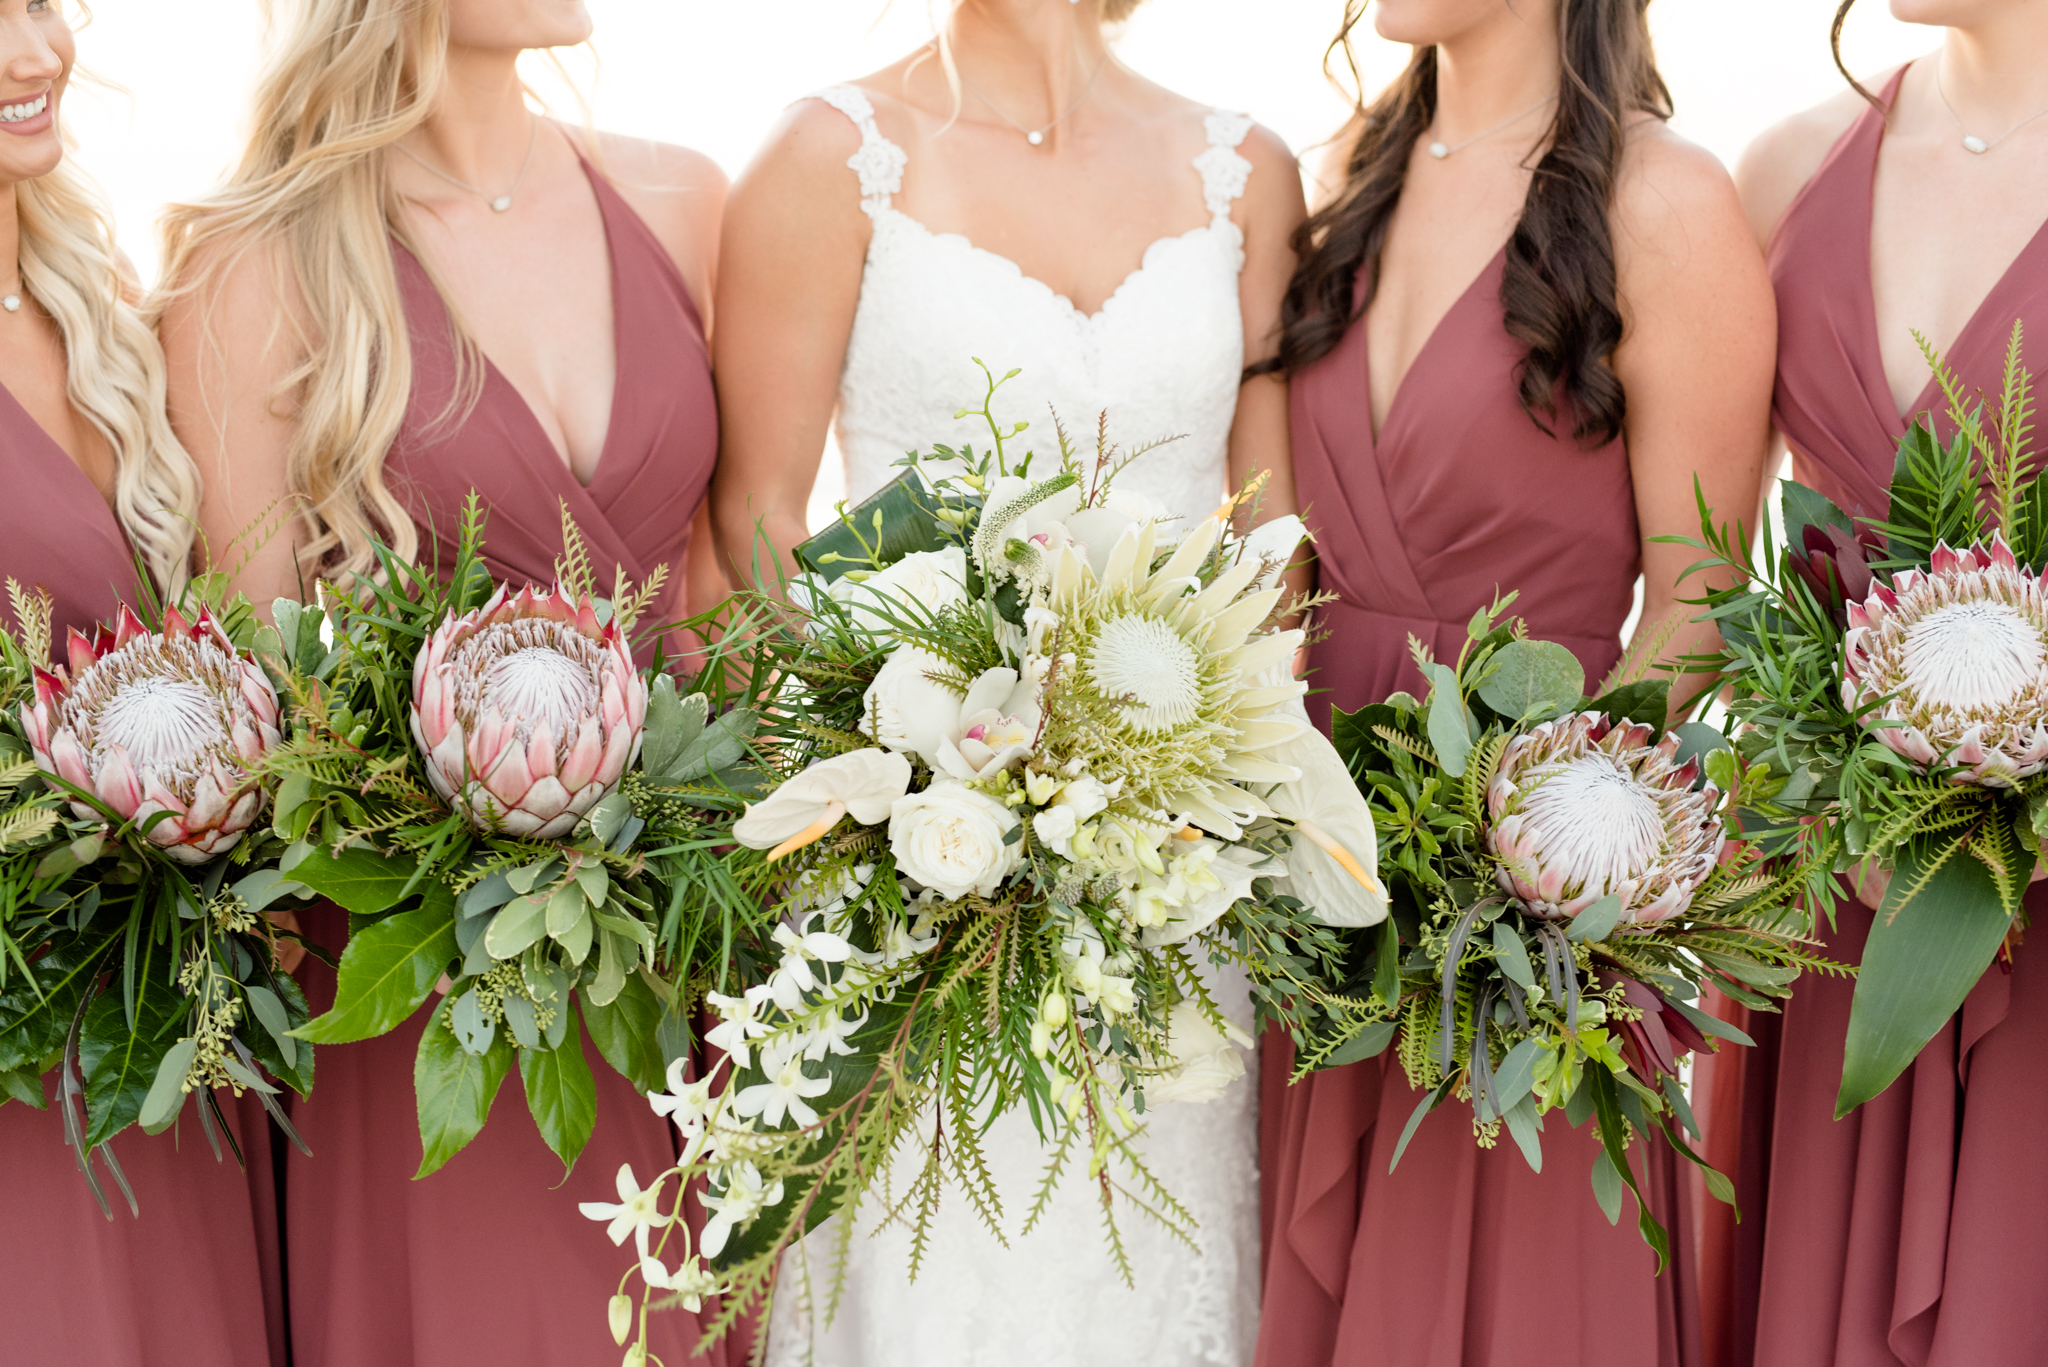 Bridal party holds tropical flowers.